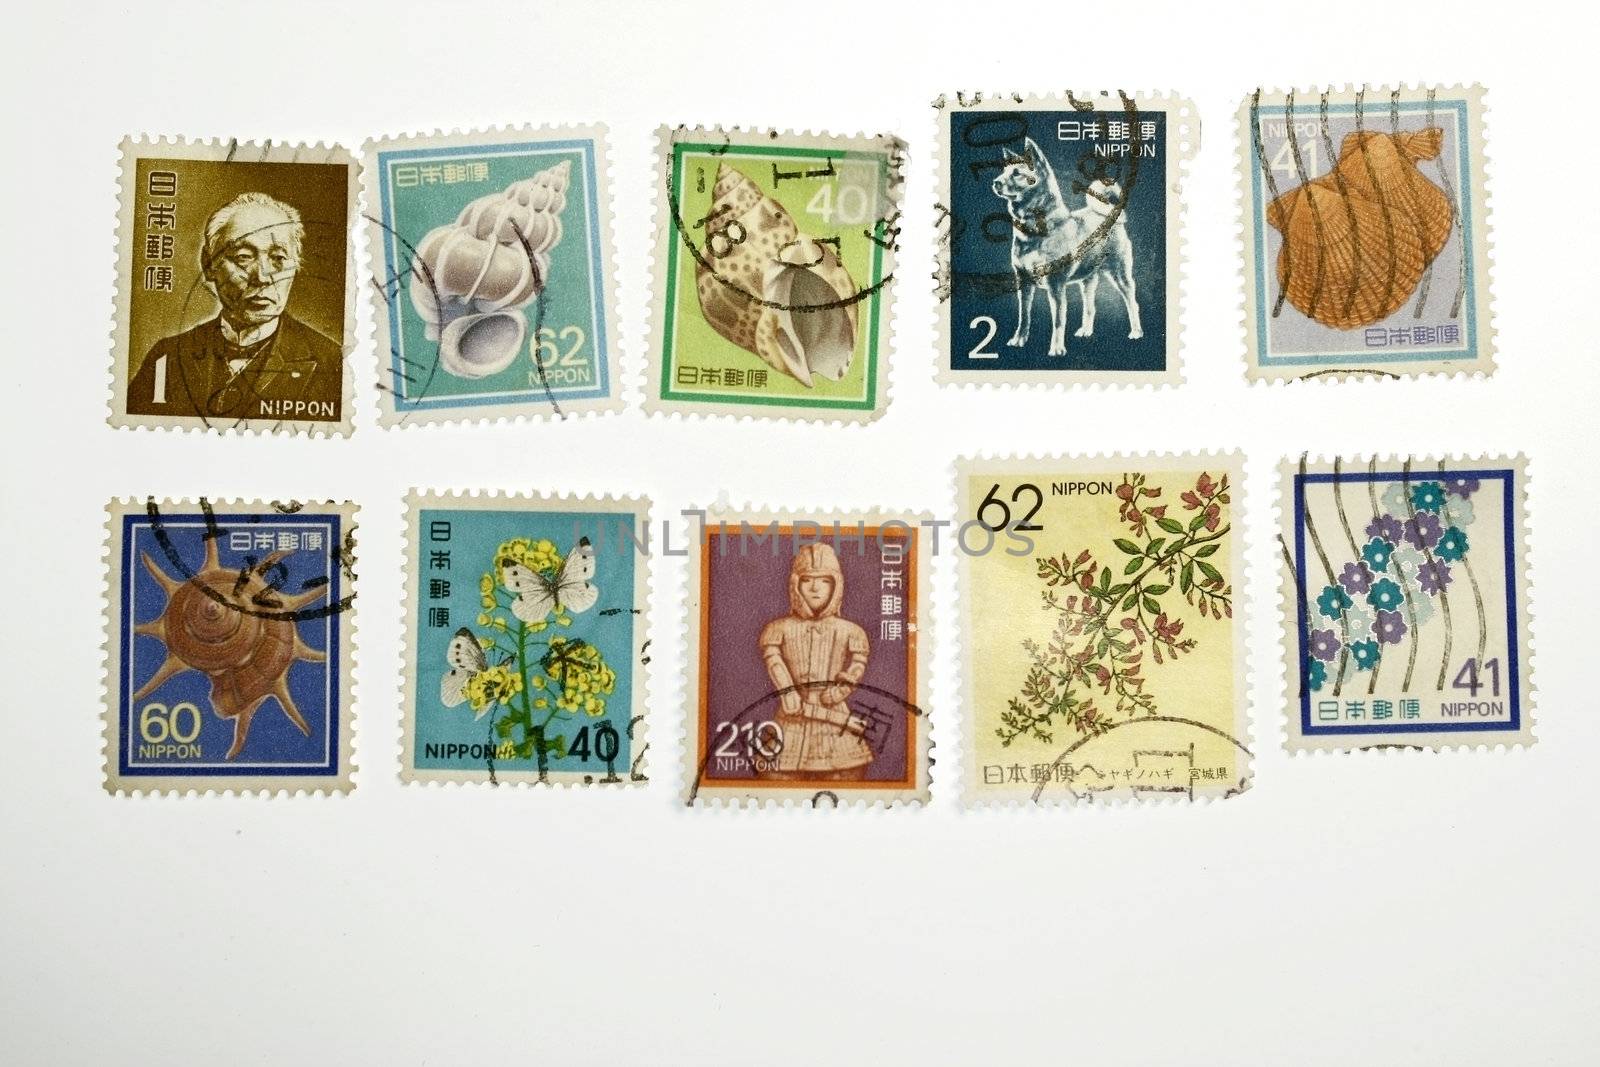 Collectible stamps from japan  Colorful historic stamp collection.
